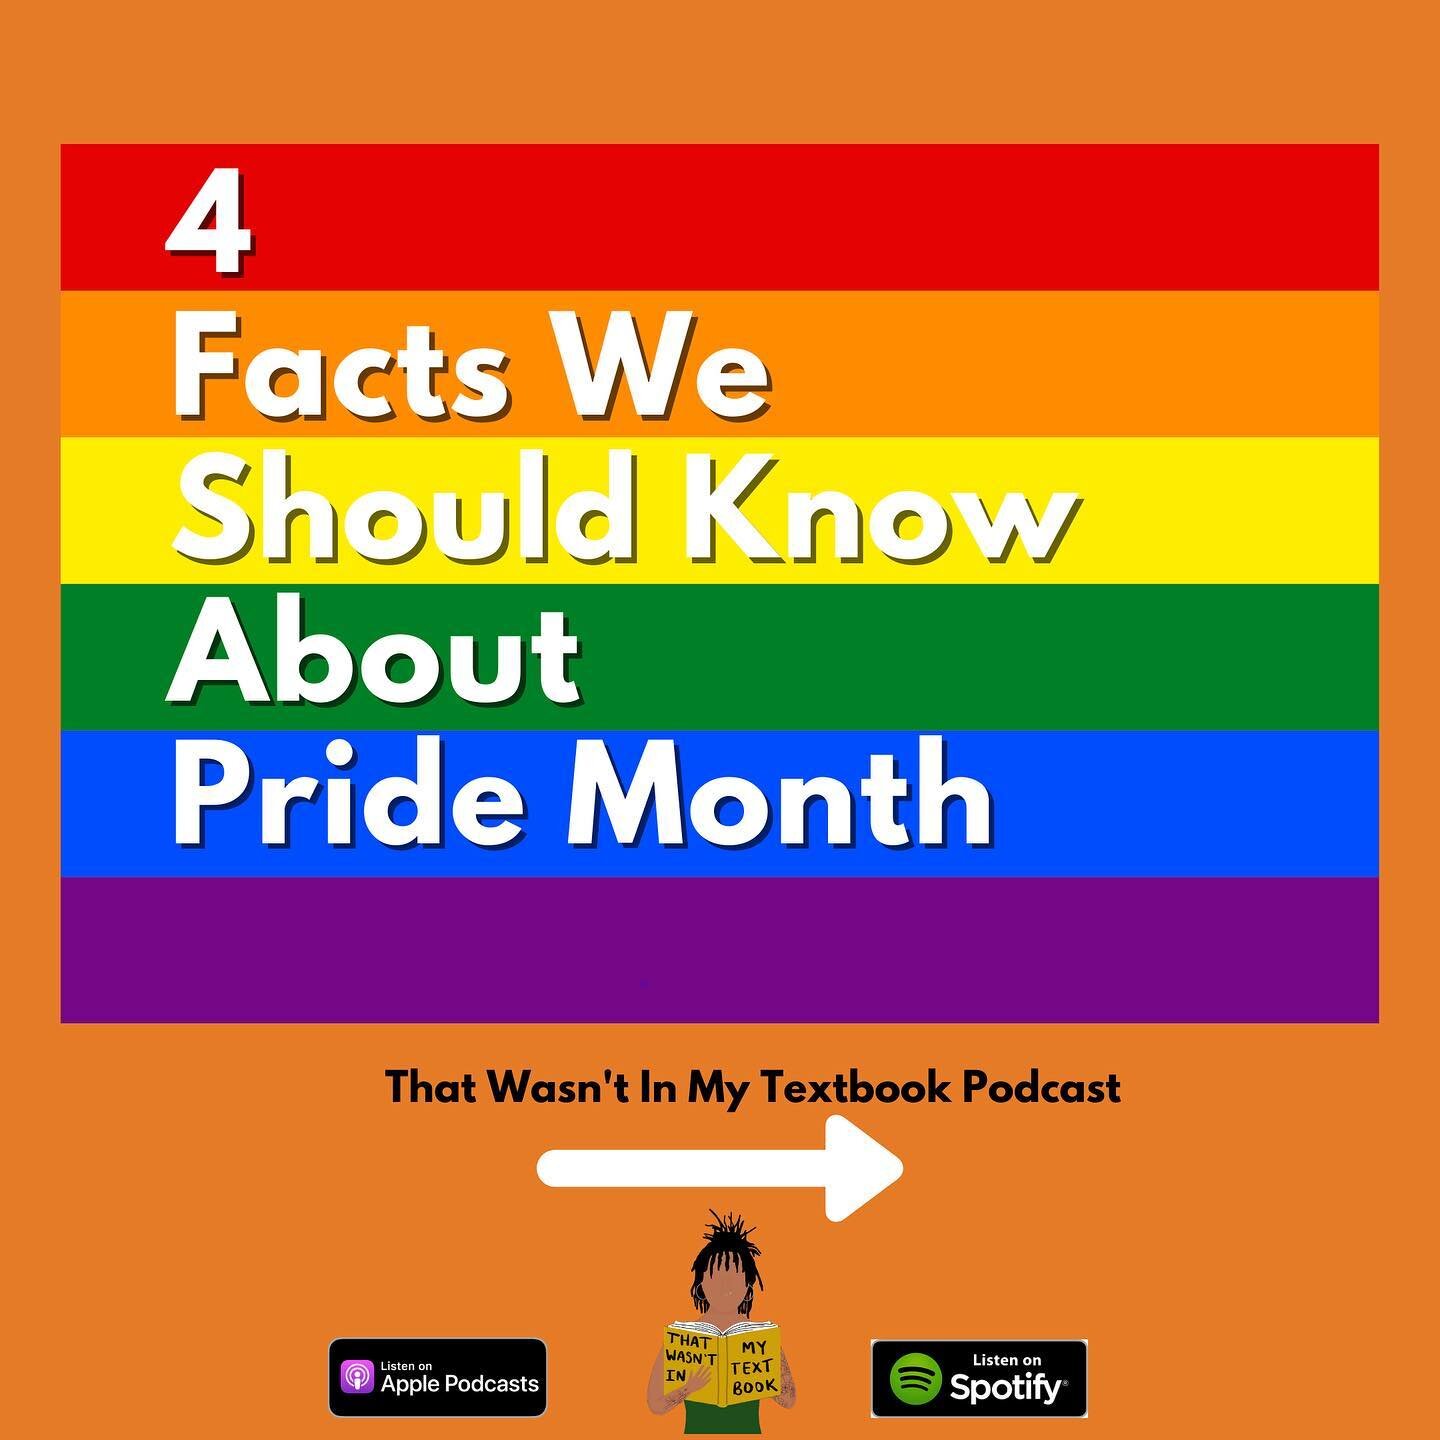 Happy Pride Month! Have you listened to the latest episode of the podcast? Listen to this 14 minutes episode To uncover all these facts and more to kick off this month long celebration of LGBTQ+ culture and activism. 🔗in Bio #ThatWasntInMyTextbook #